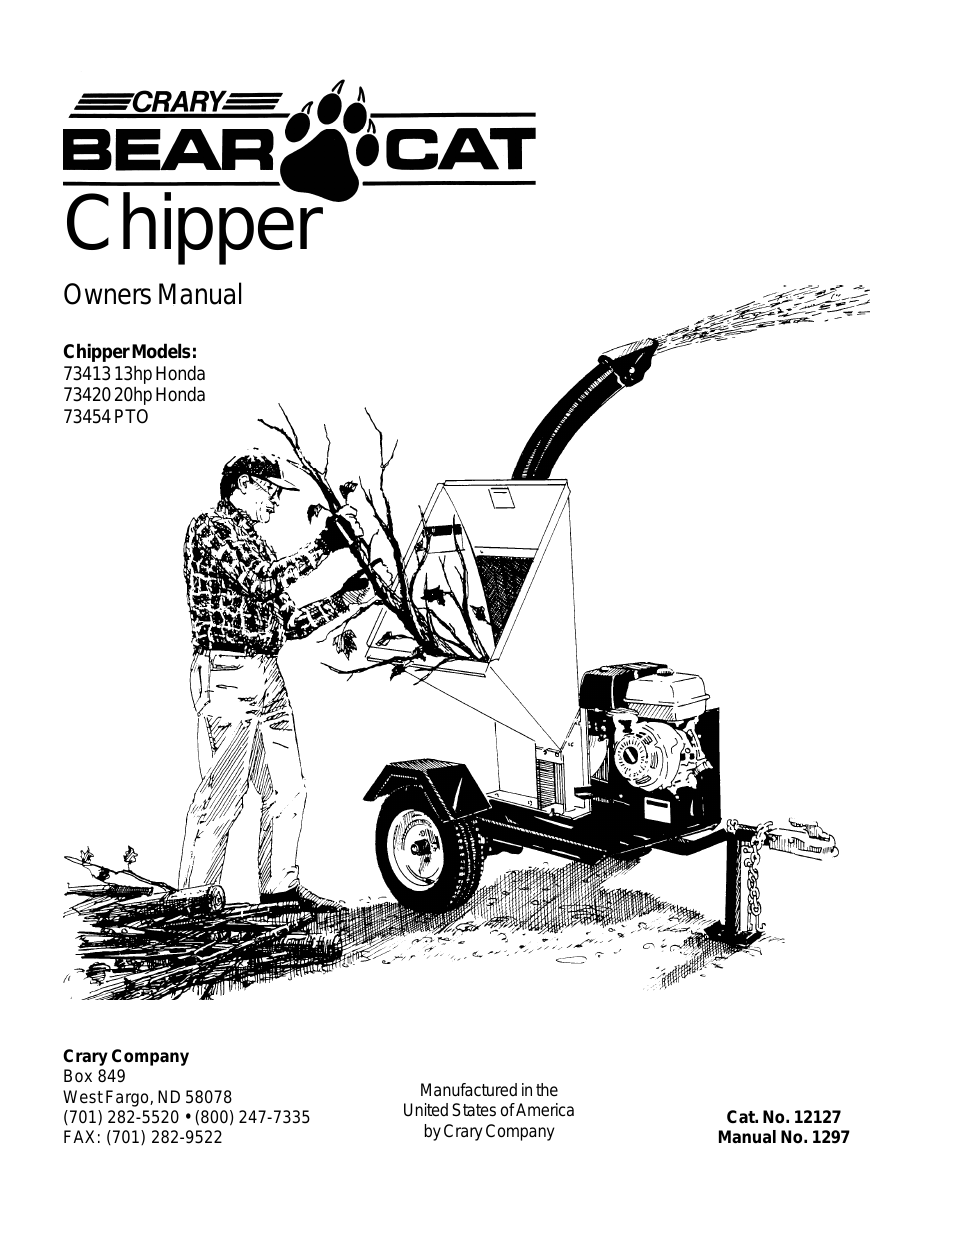 73420 Owners Manual v.2